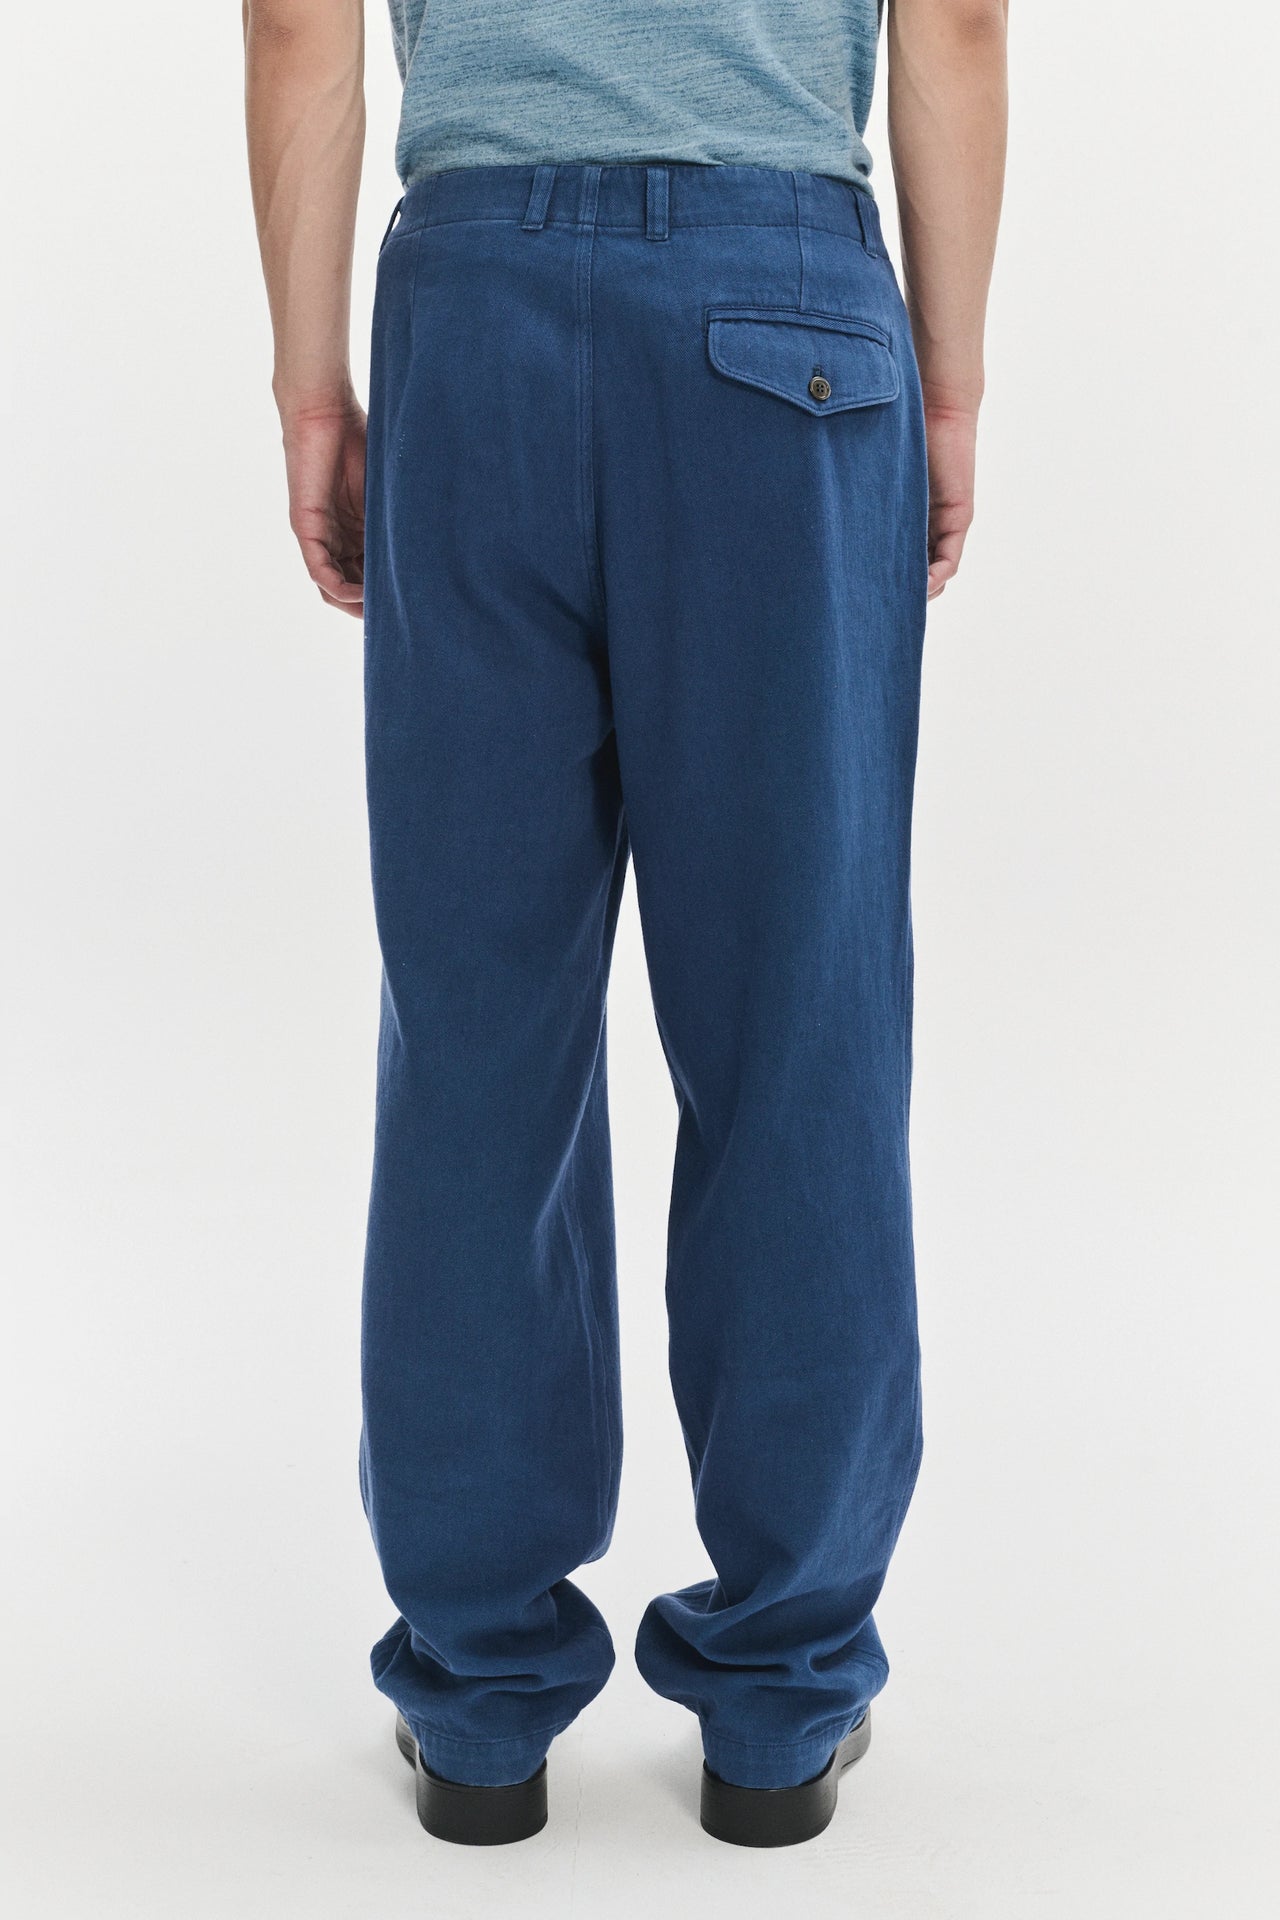 Rolling Hills Trousers in a Berlin Blue Mix of Japanese Linen and Cotton